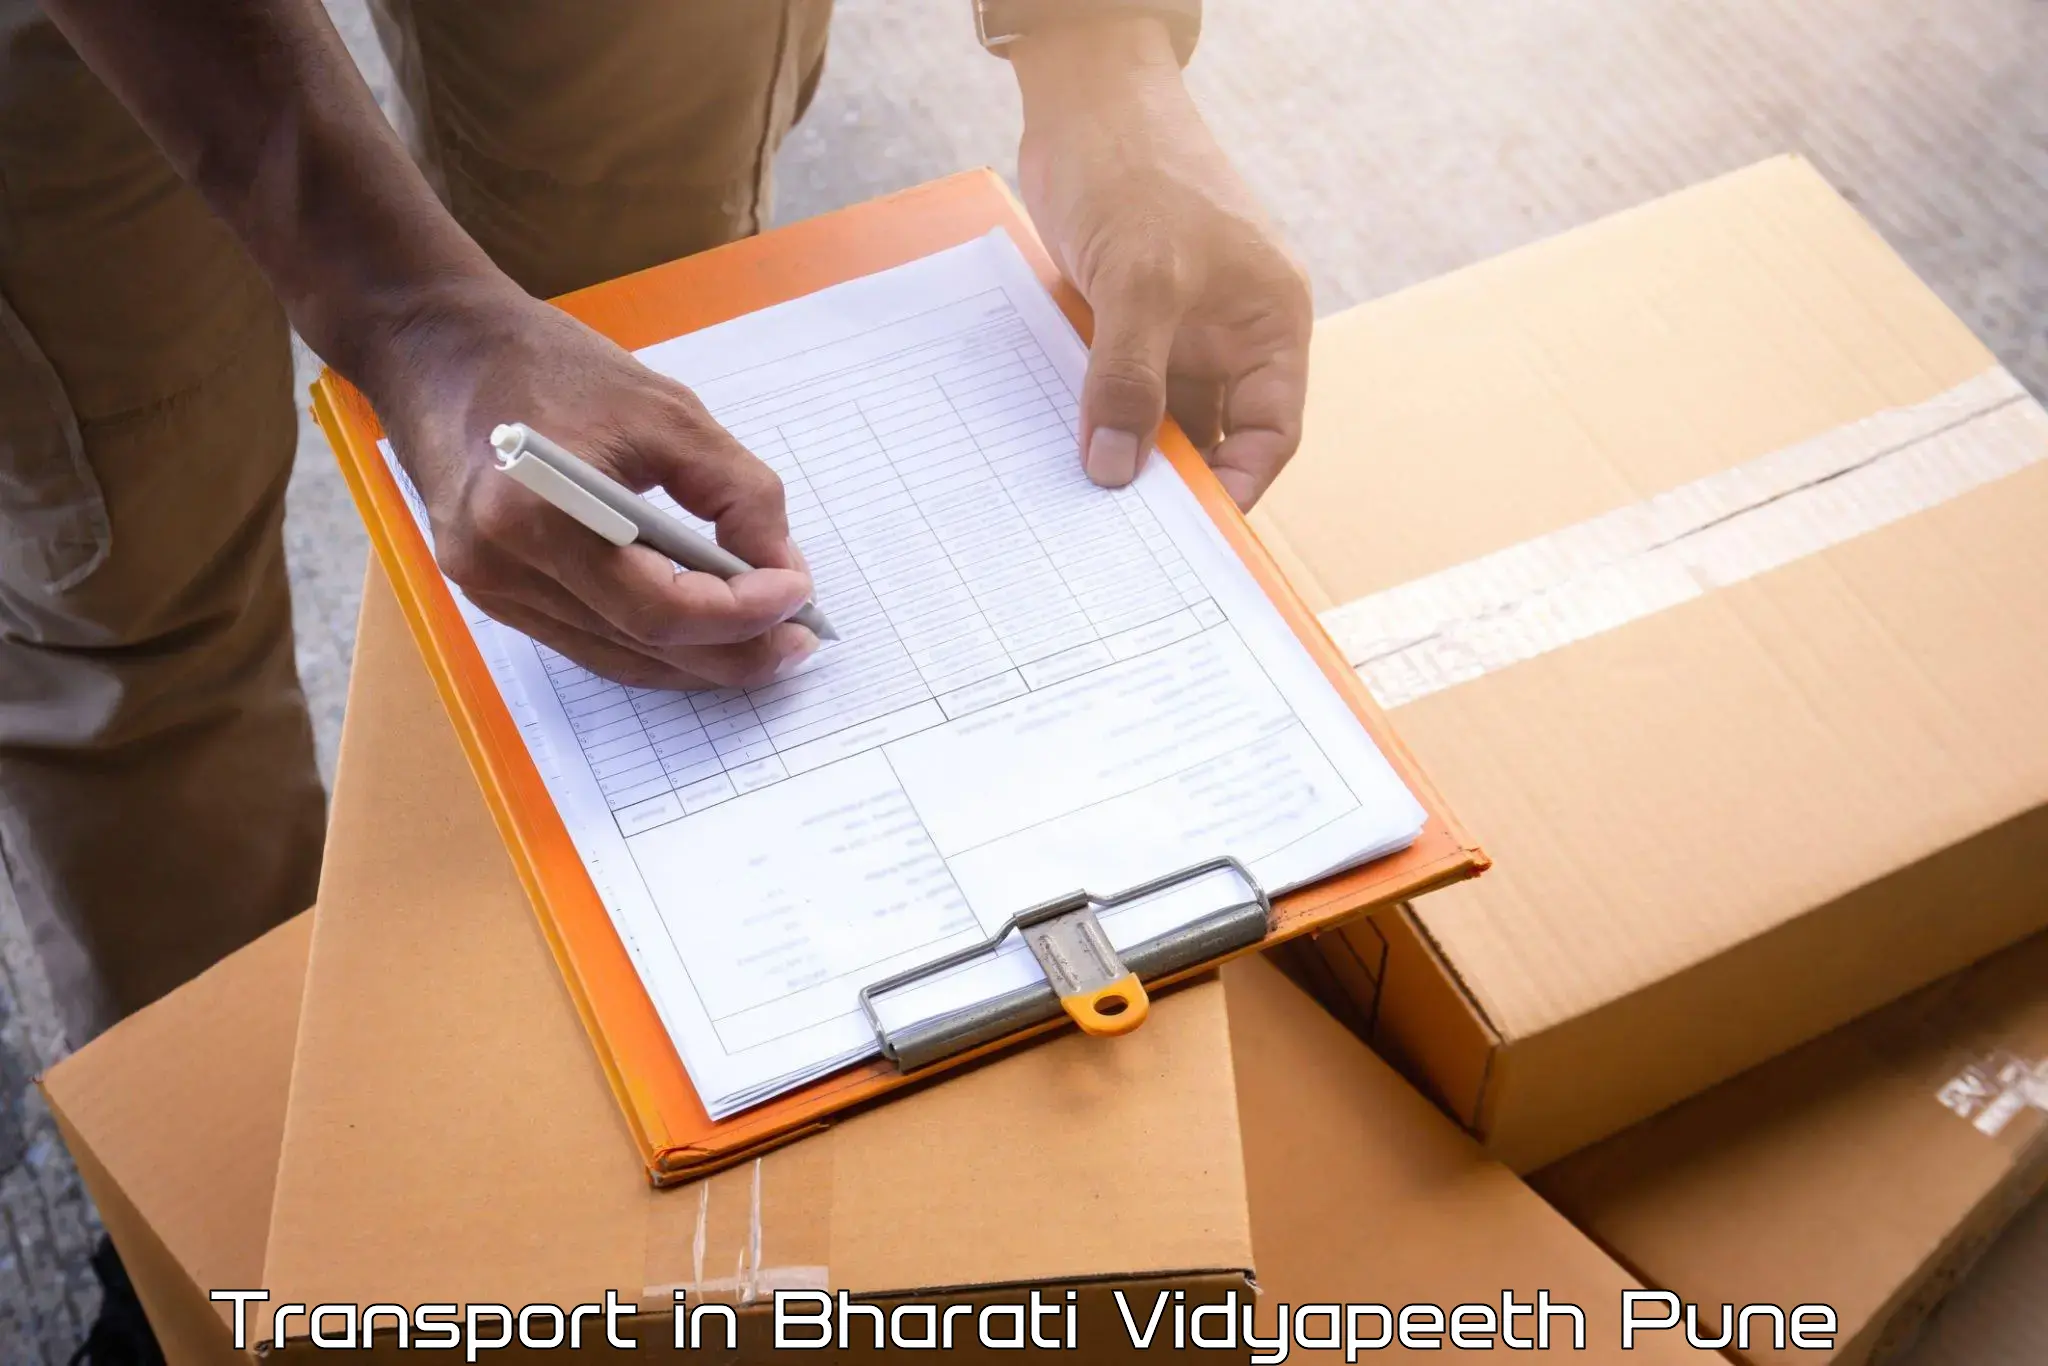 Commercial transport service in Bharati Vidyapeeth Pune